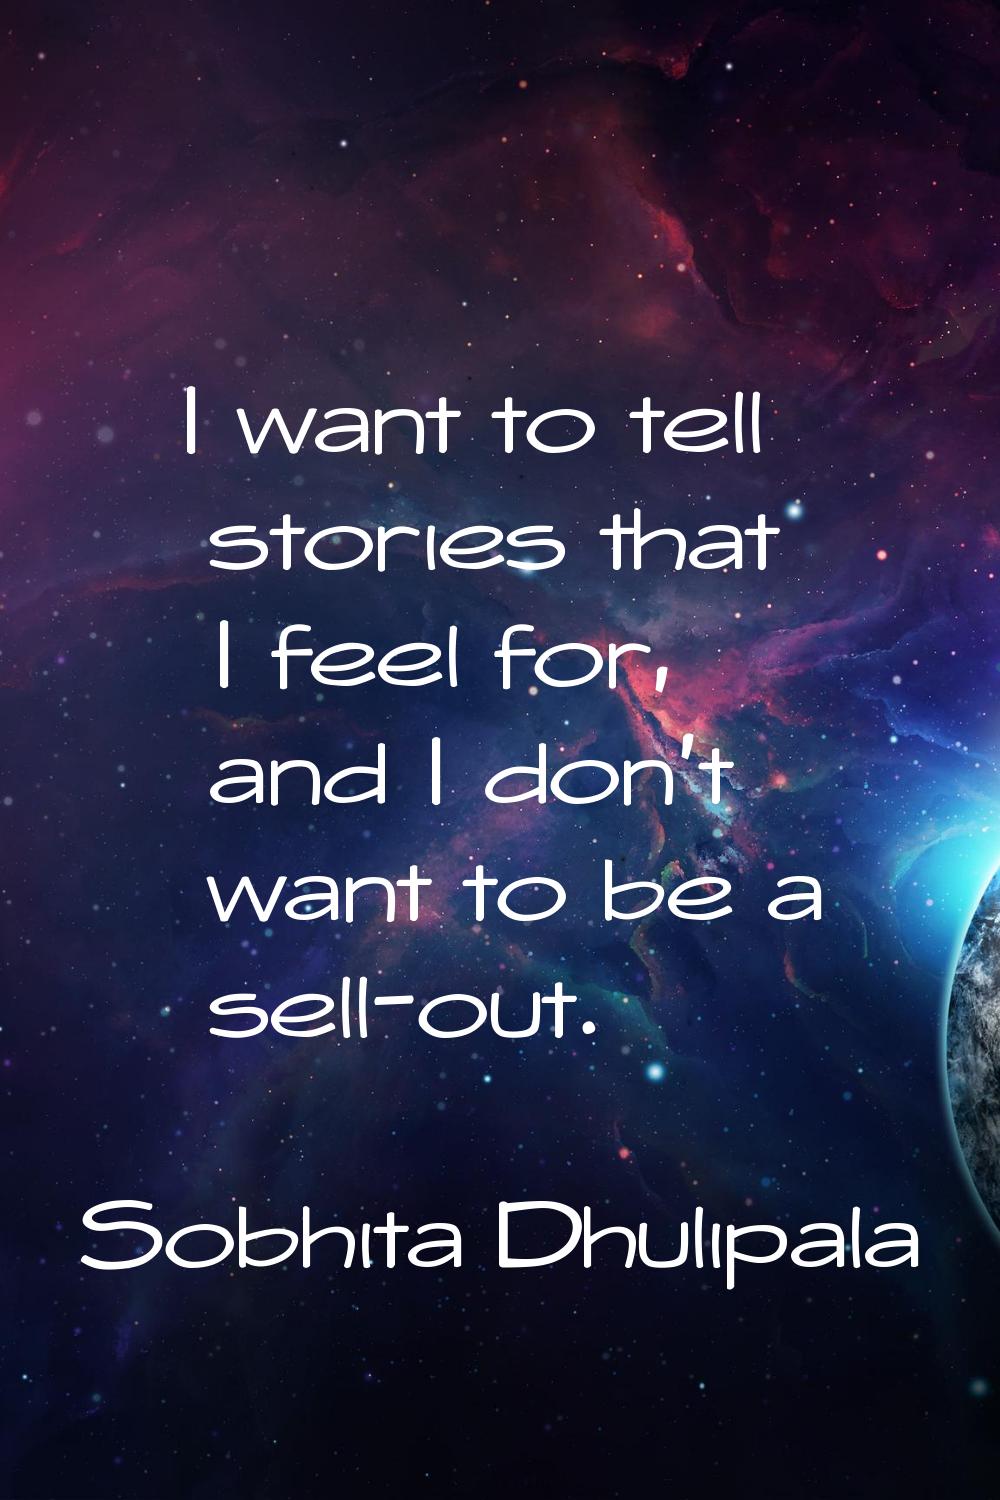 I want to tell stories that I feel for, and I don't want to be a sell-out.